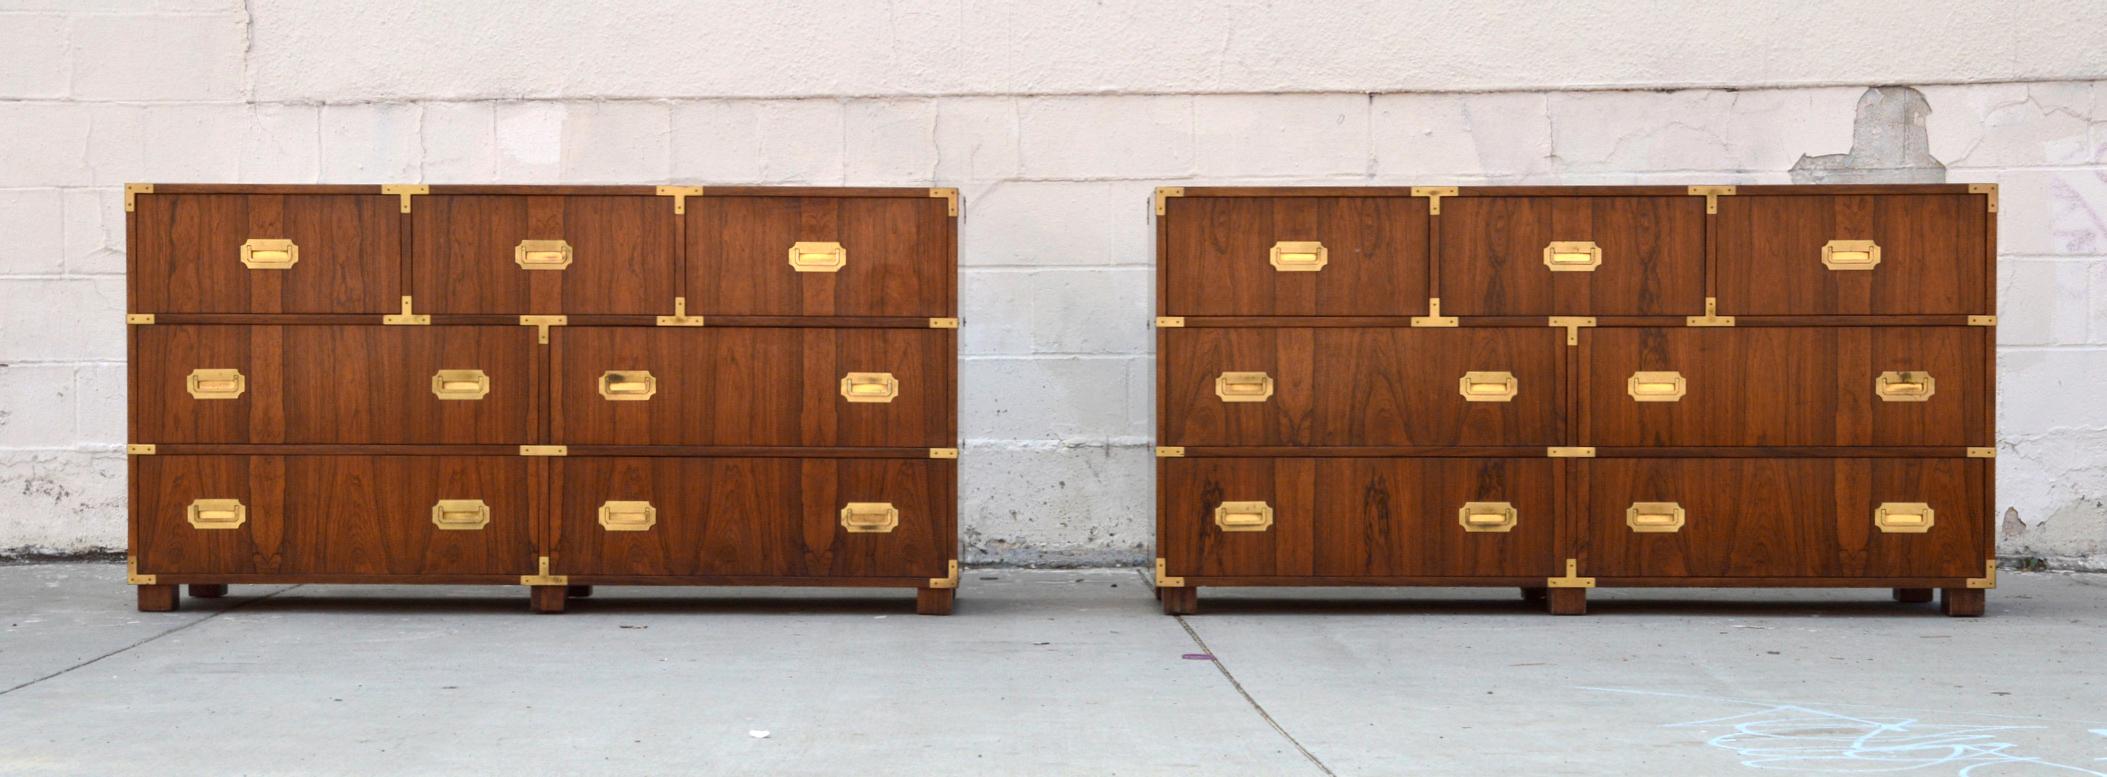 This pair of Campaign style baker chests of drawers each have 7 drawers and are made from bookmatched walnut with brass pulls. The careful book matching can be seen throughout the piece.

While they are listed here as a pair we would also consider